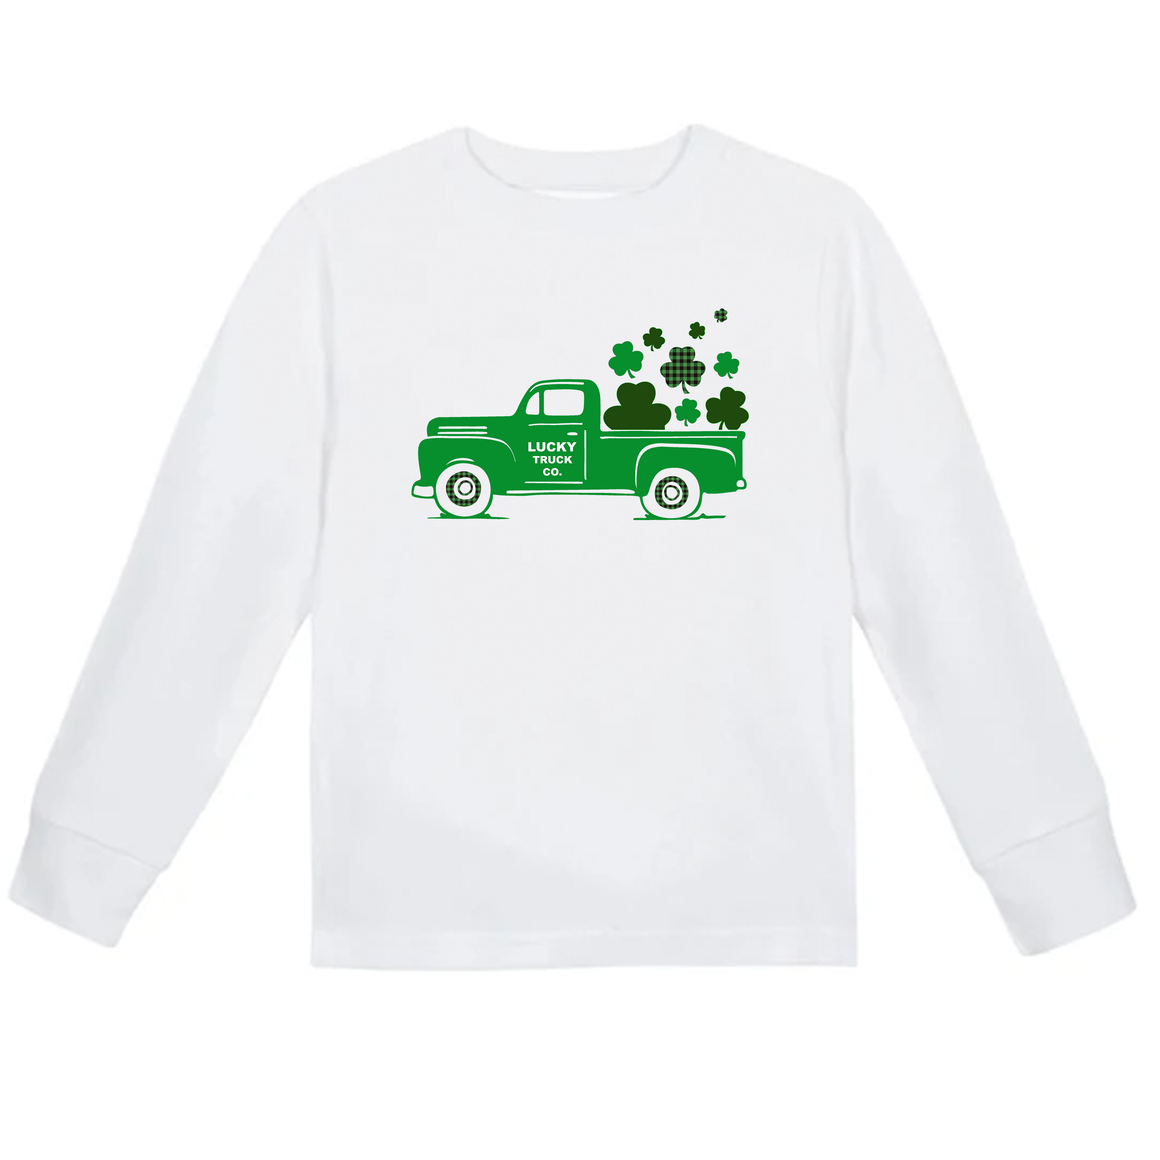 Loads of Luck Truck 3/4 Sleeve Baseball Tee (Youth) and Long Sleeve(Toddler) Shirt